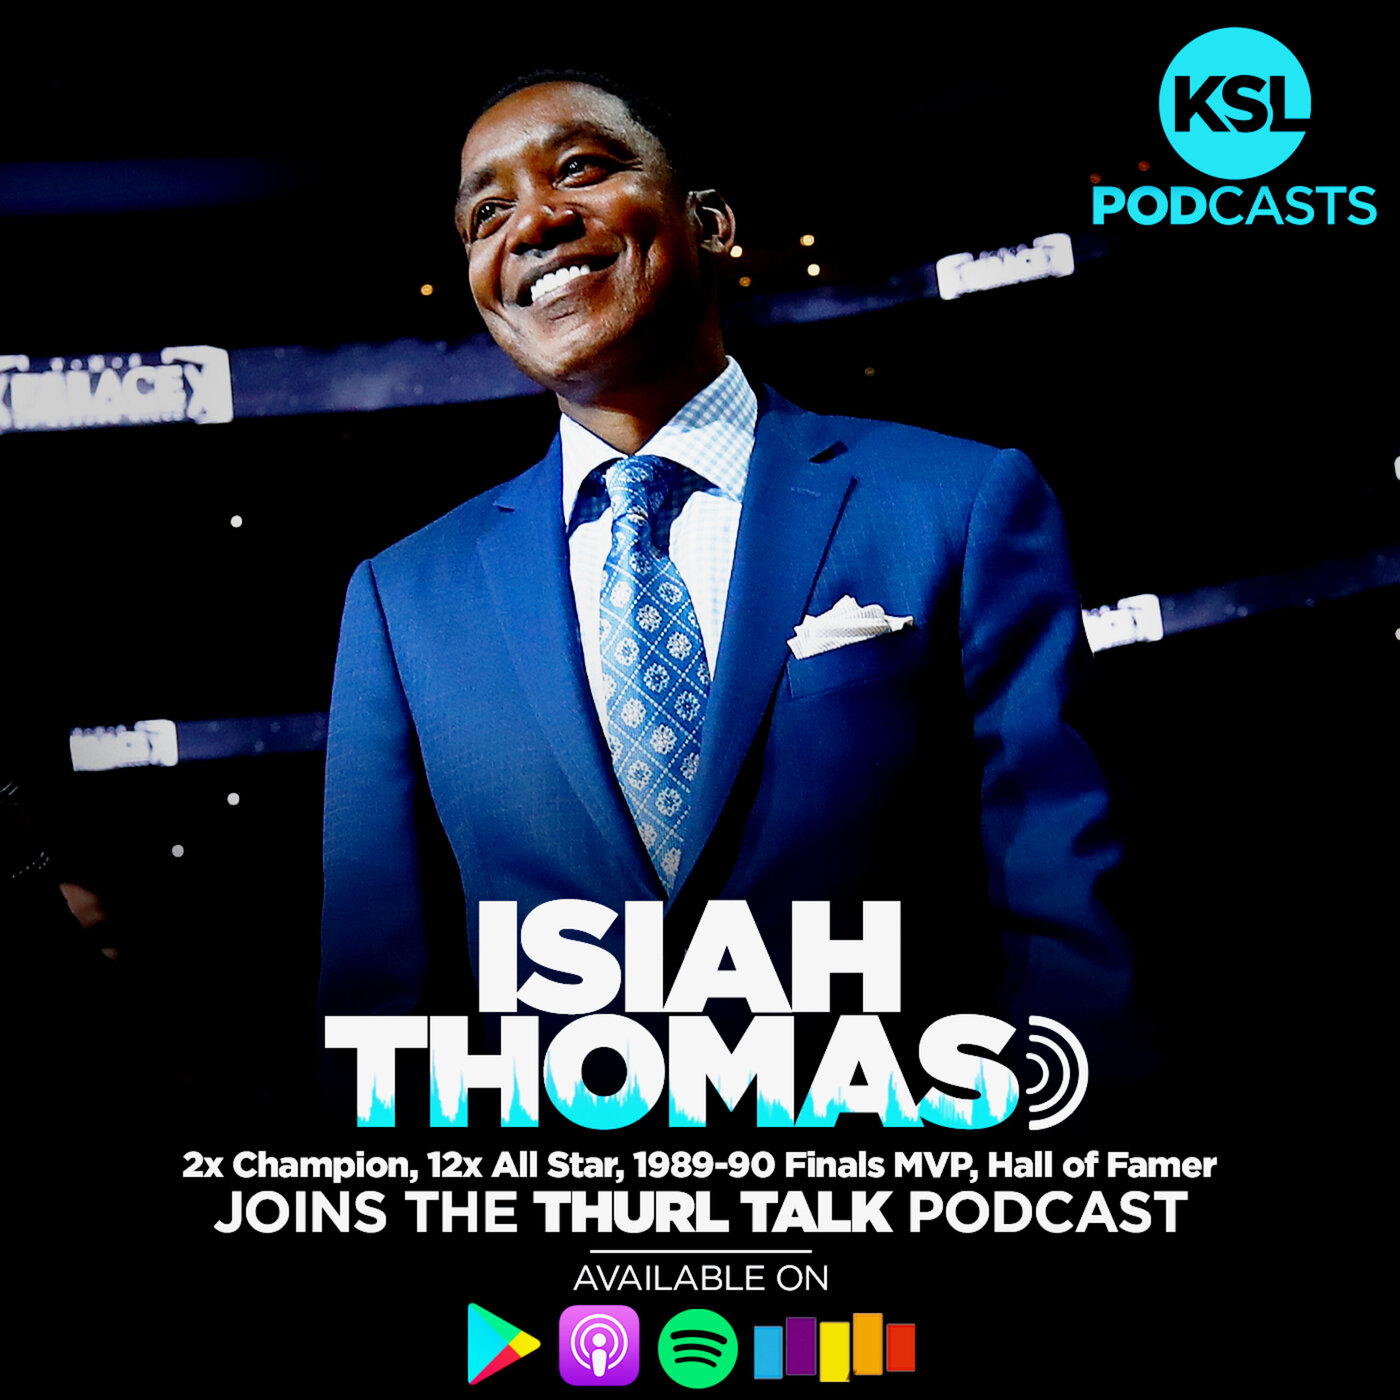 Isiah Thomas talks civil unrest, 'The Last Dance', growing up in Chicago, and the NBA